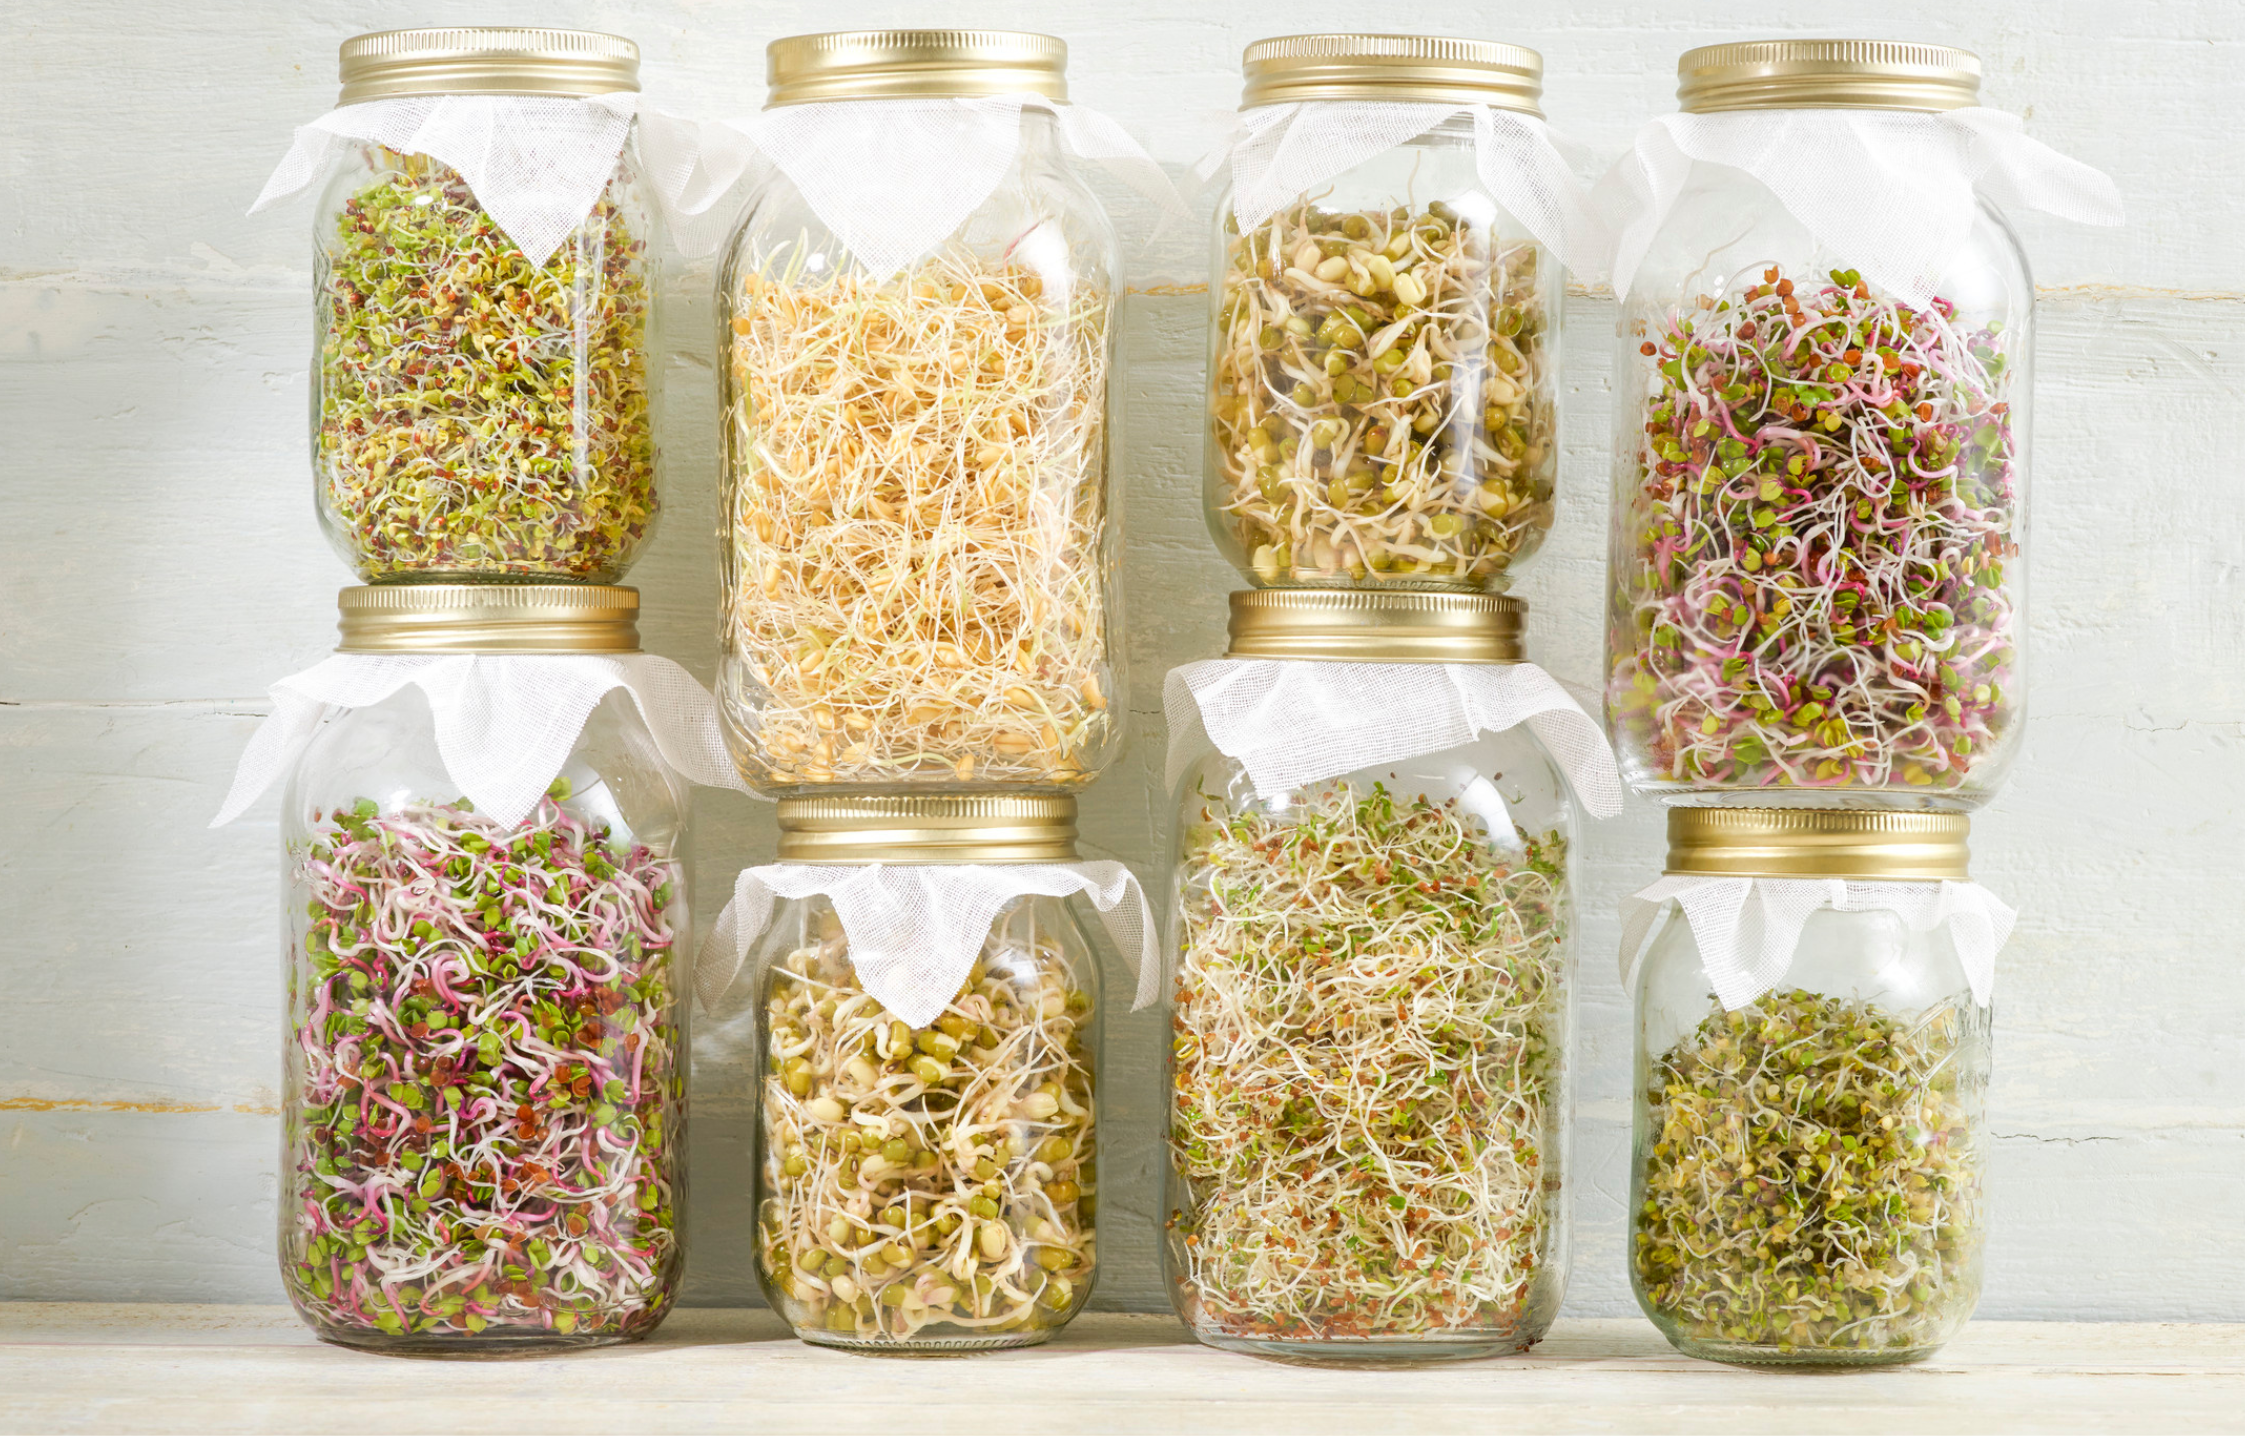 HOW TO SPROUT SEEDS AT HOME